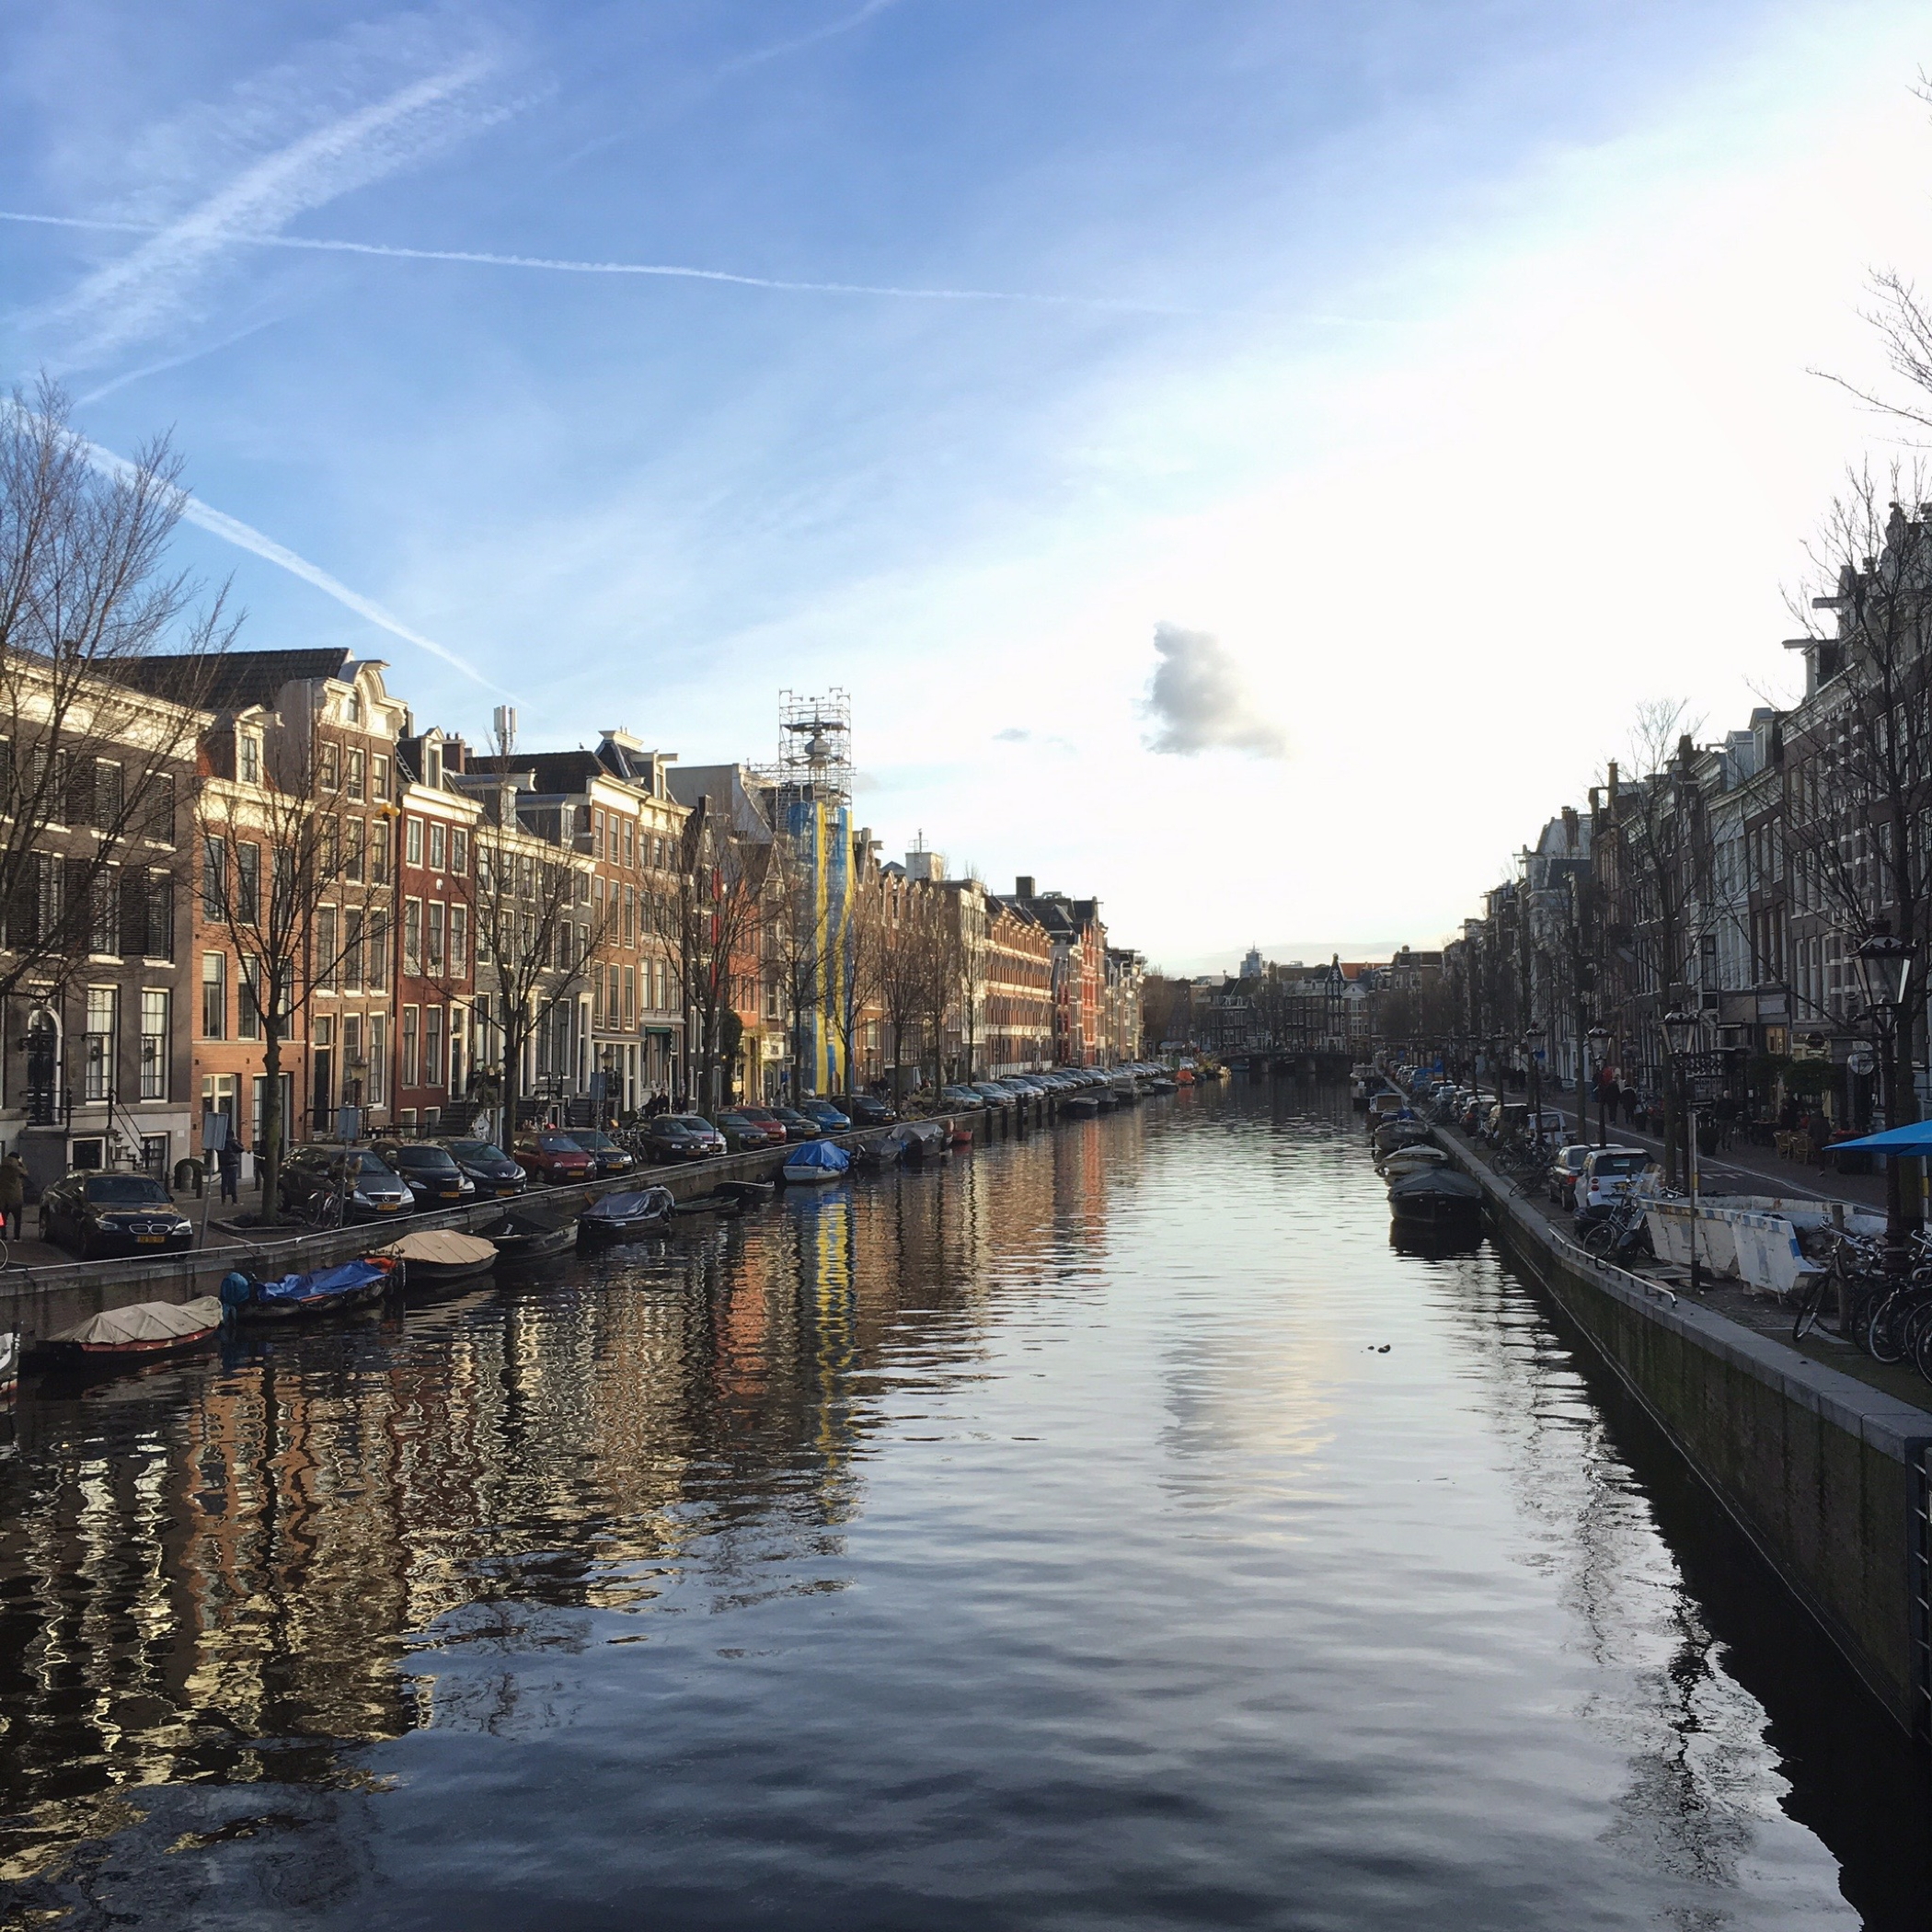 One favorite Instagram 2015 photo from Amsterdam